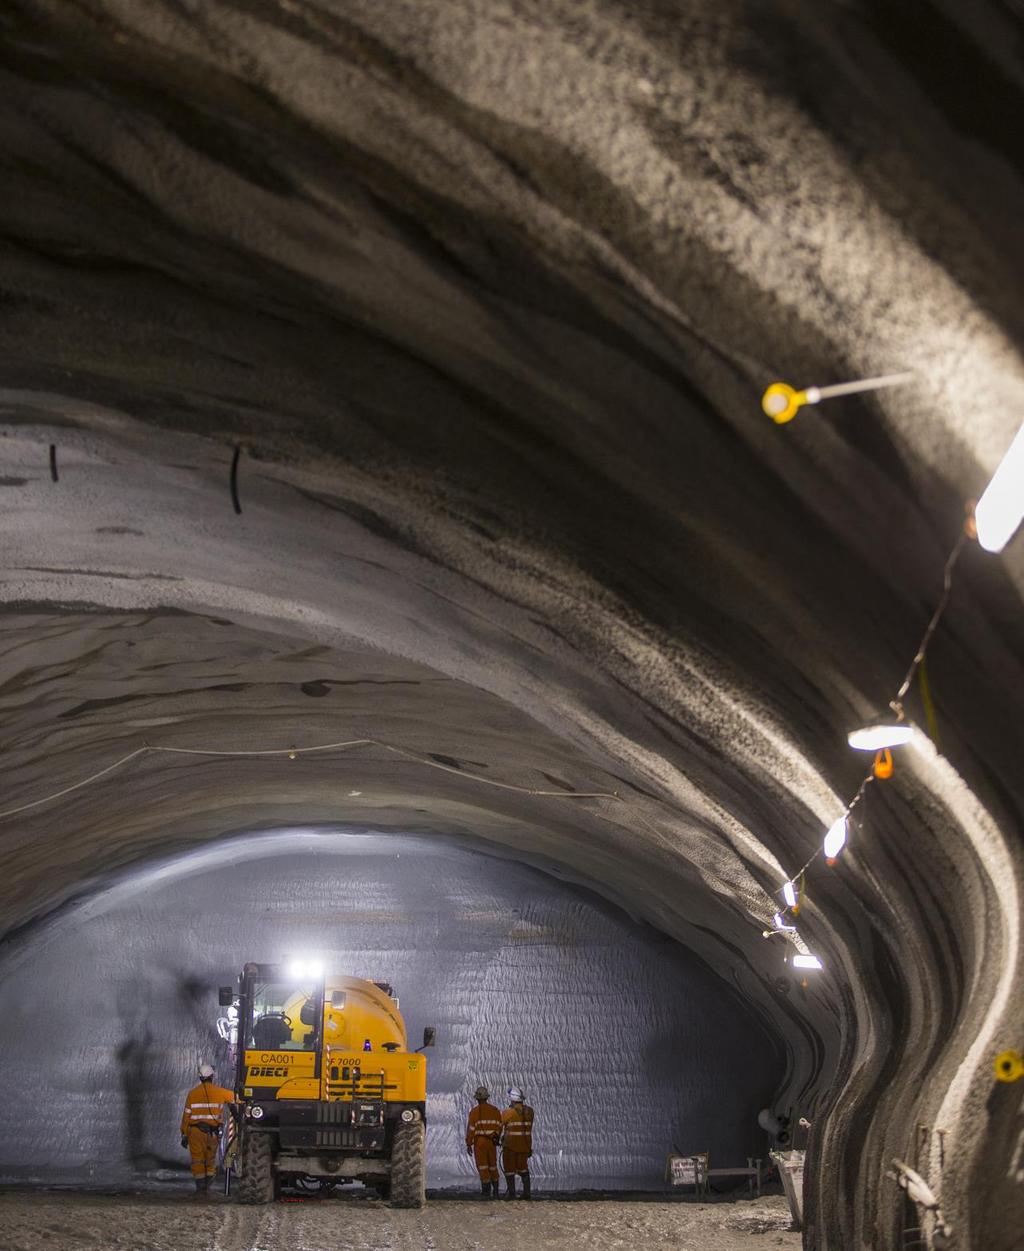 Engineering Major Projects Backlog 1 Project Location 2 A$m 3 Construction Value NorthConnex M1/M2 Tunnel NSW 1,283 Northern Connector SA 985 Gateway Upgrade North Qld 658 Oxley Highway to Kundabung,